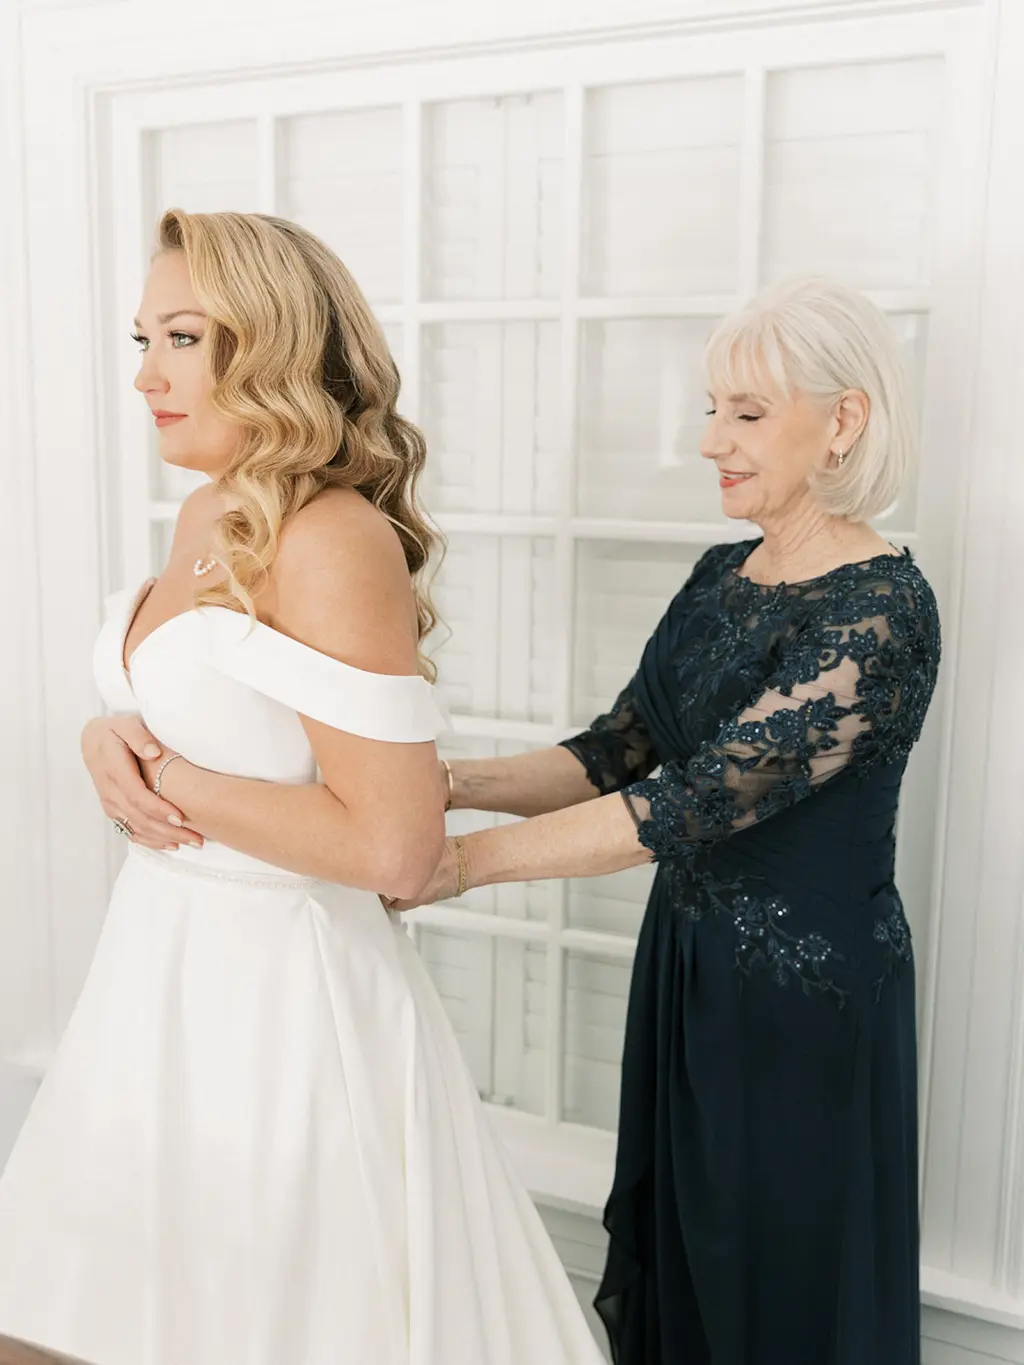 Bride Getting Ready | White Classic Off-the-shoulder A-line Wedding Dress | Wavy Wedding Hair Ideas | Tampa Bay Hair and Makeup Artist Femme Akoi Beauty Studio